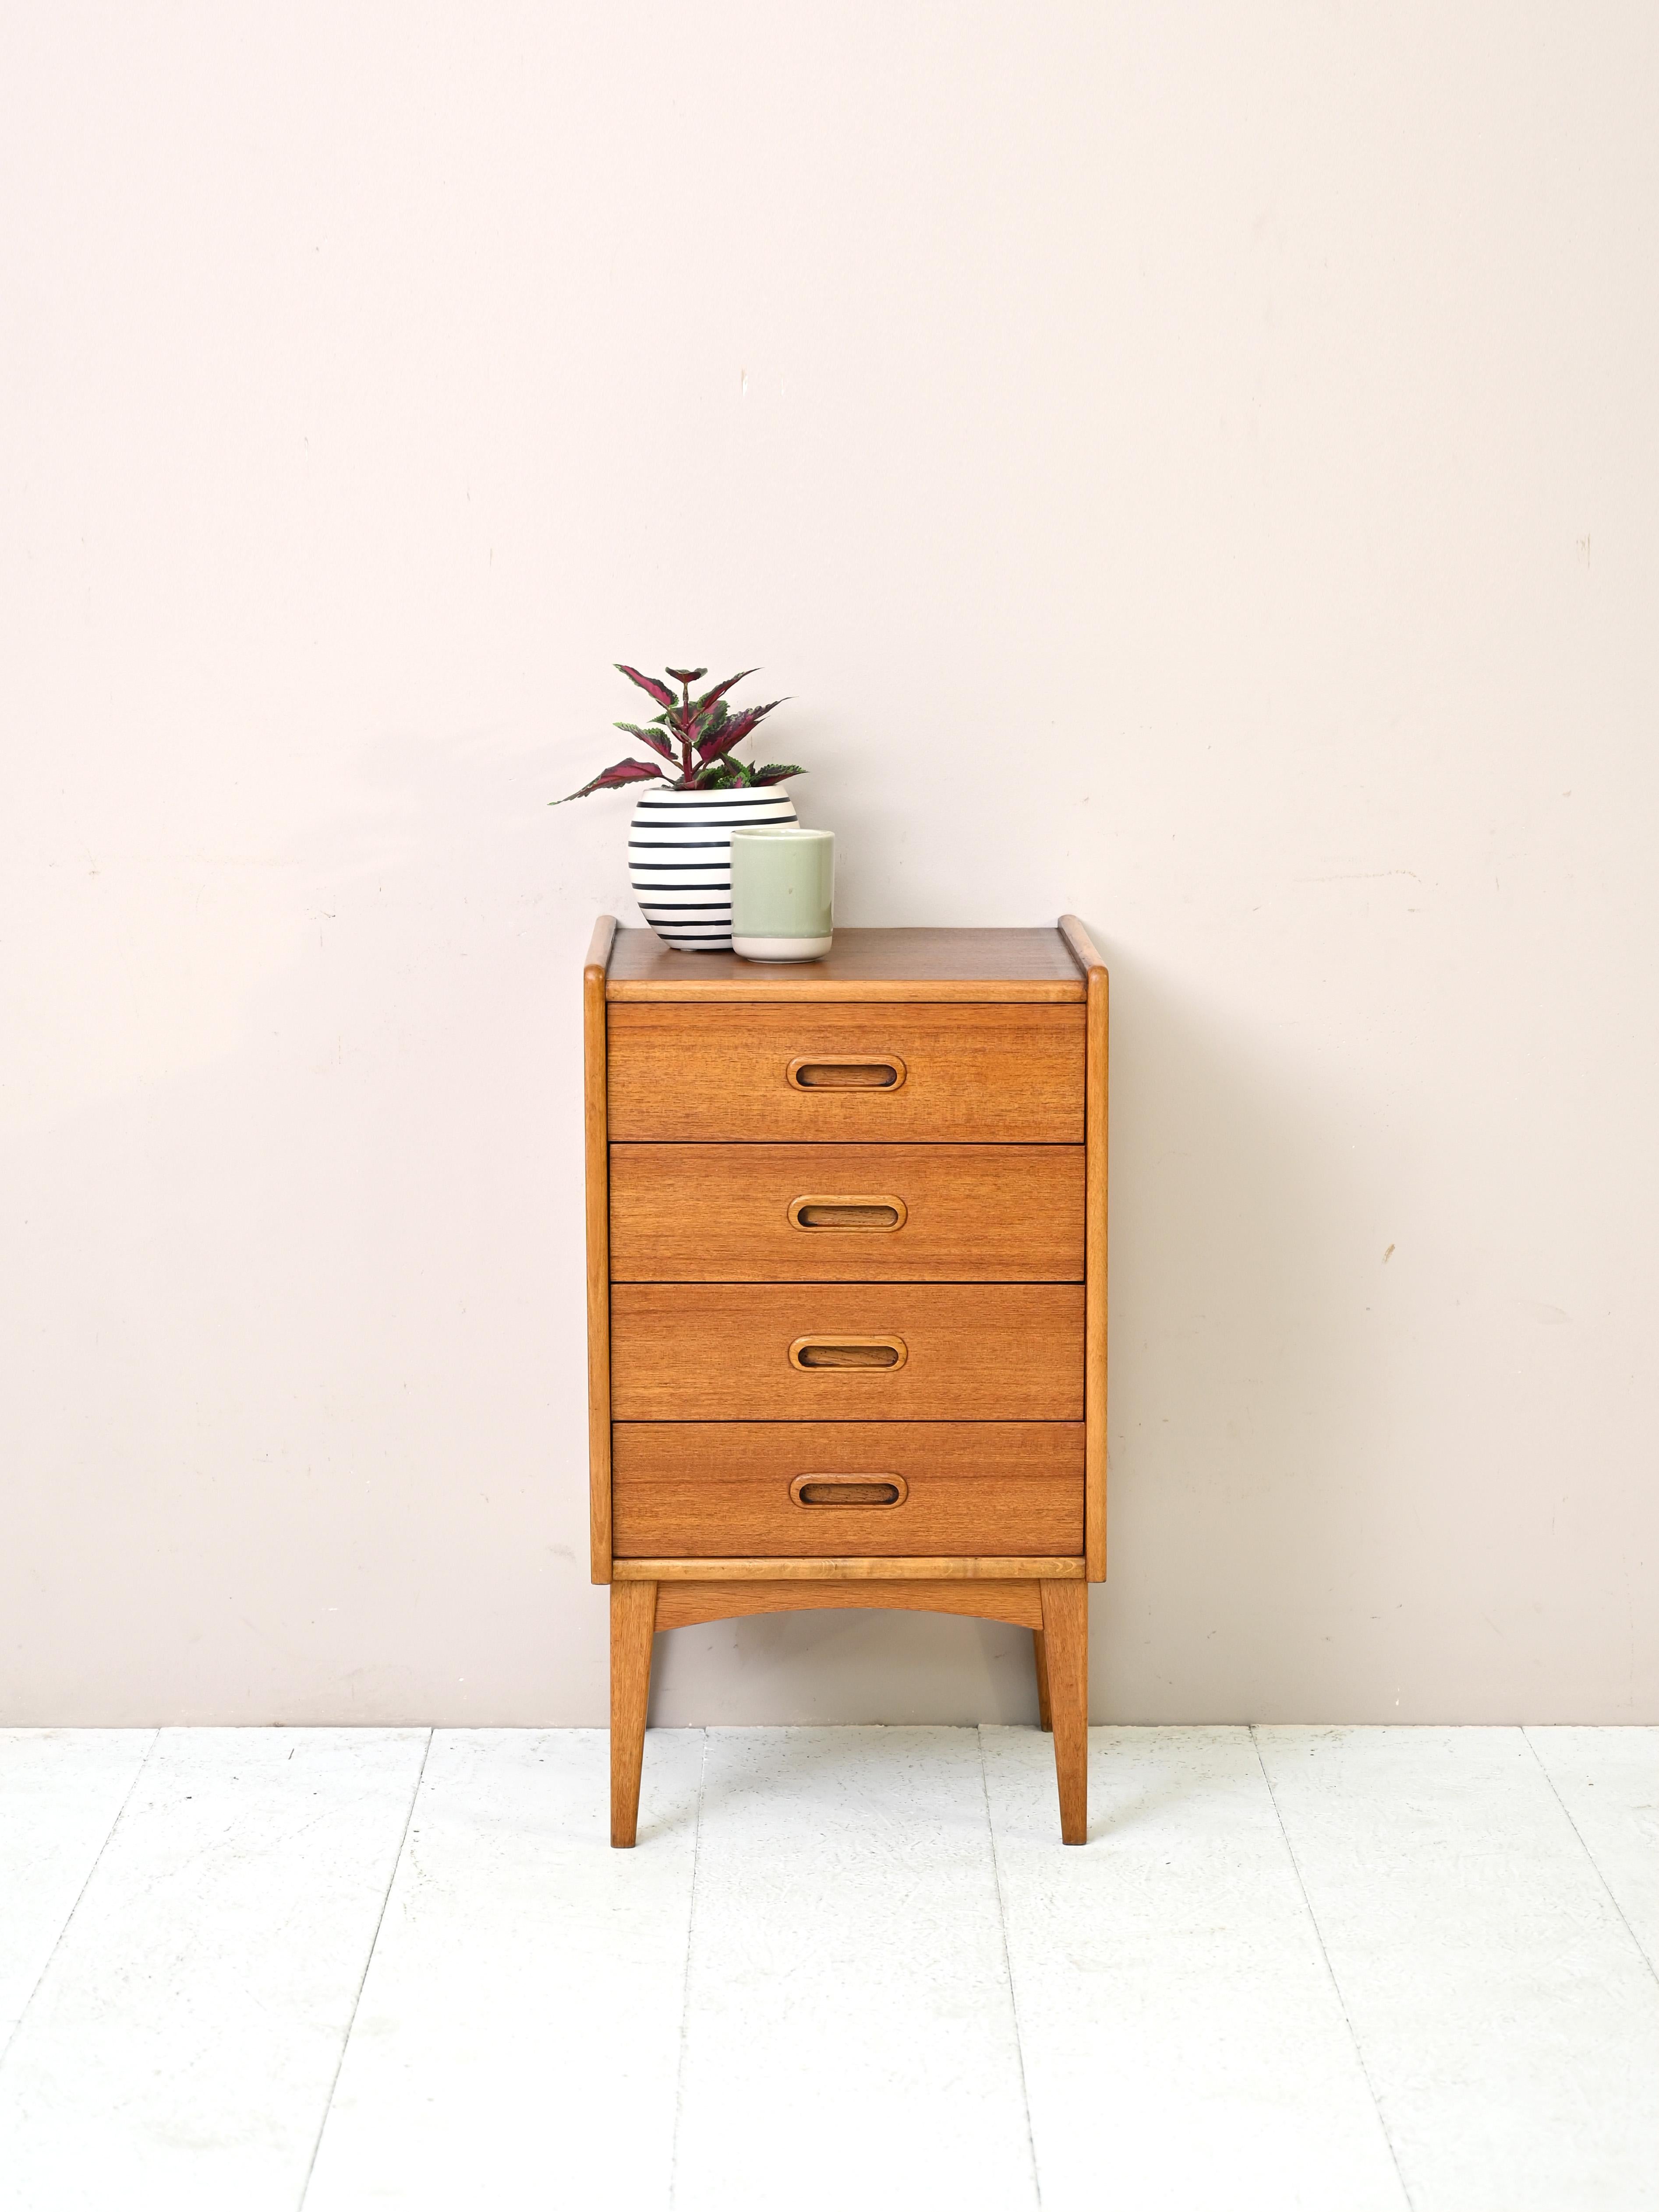 Modernist chest of drawers made in Scandinavia in the 1960s.
Simple and compact this Nordic design piece features four drawers with the handle carved
in the wood.
Ideal as a bedside table or storage unit for the entryway or bathroom.

Good